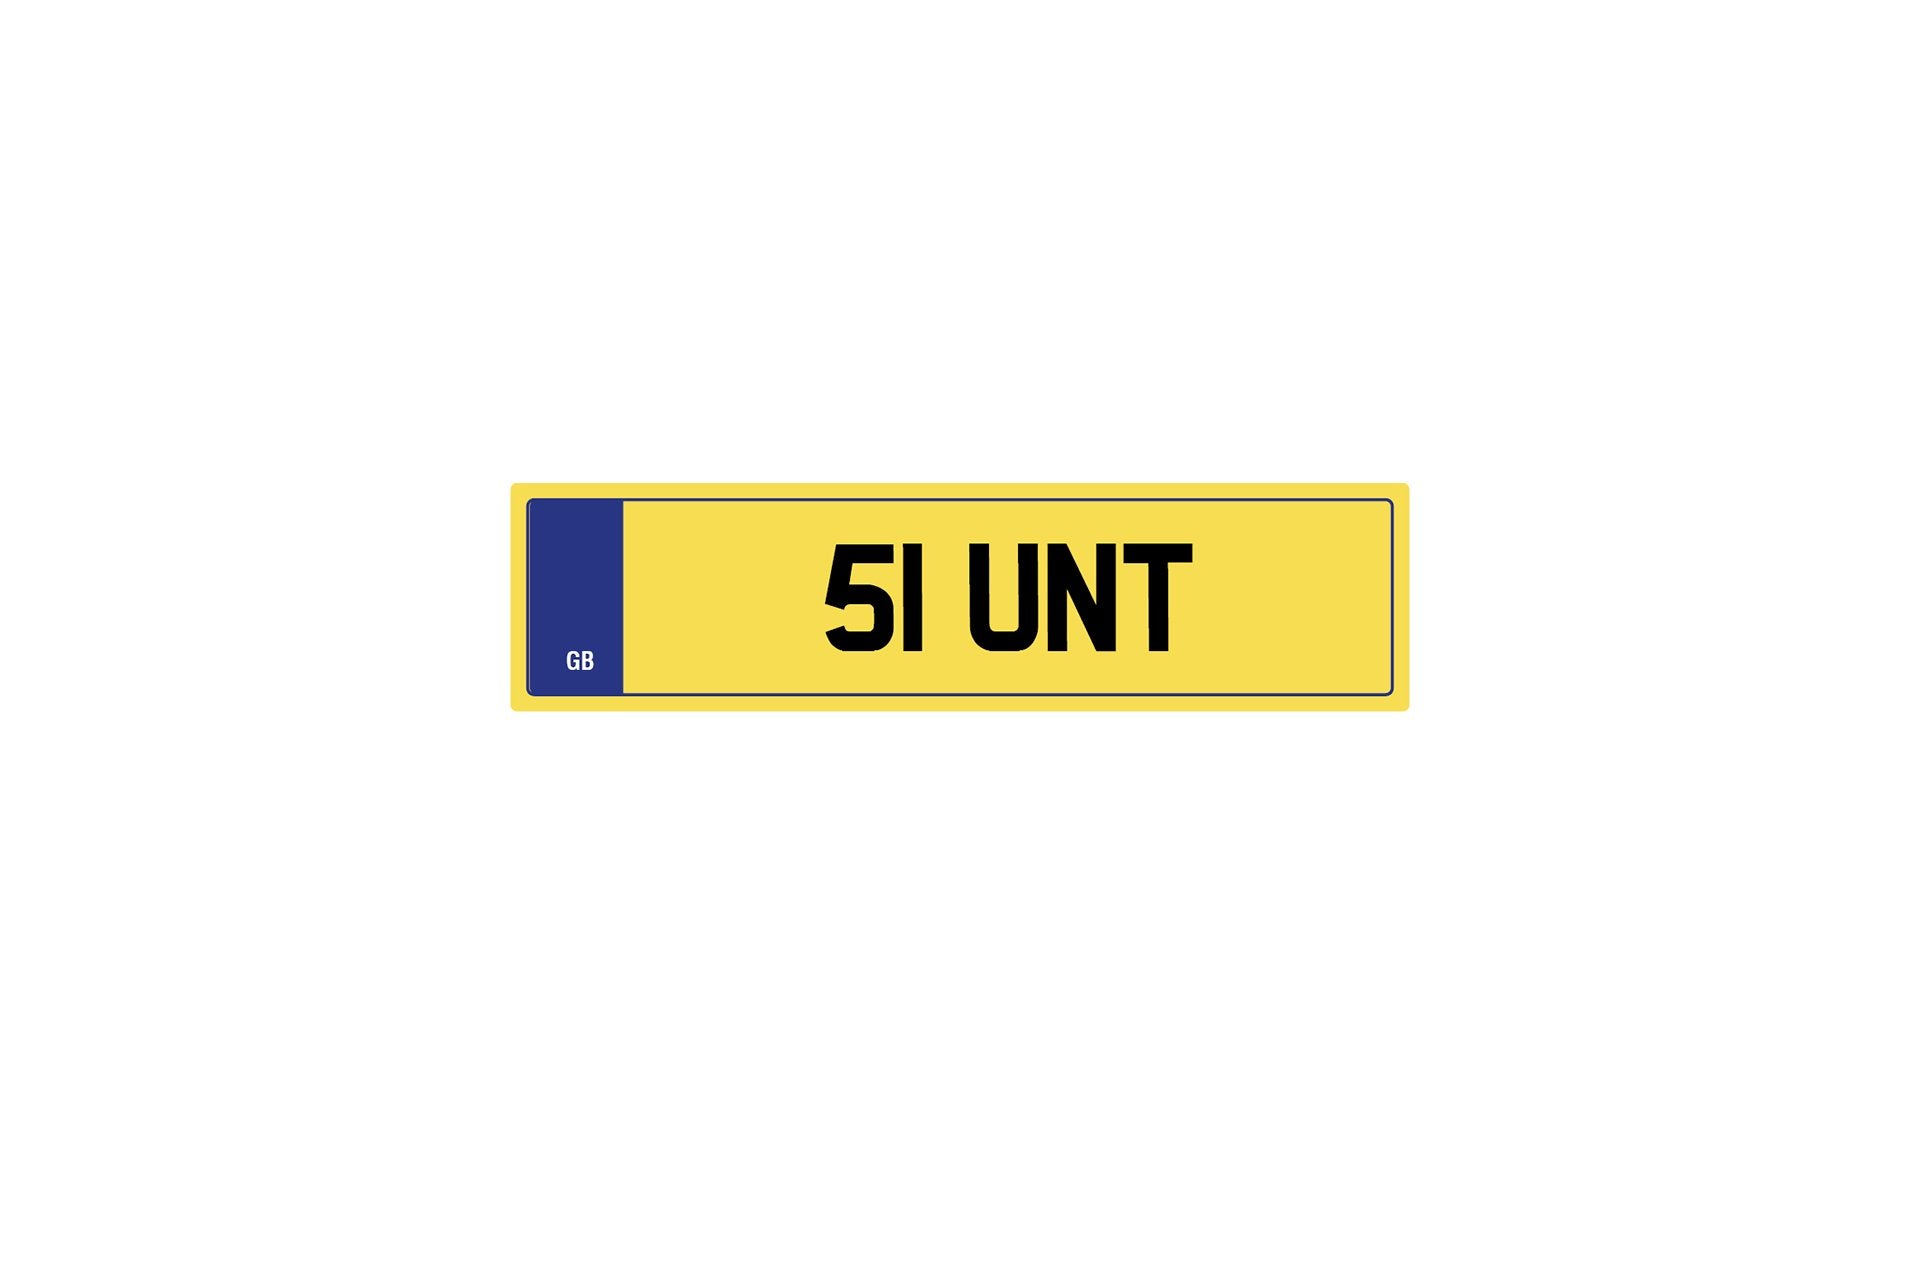 Private Plate 51 Unt by Kahn - Image 233